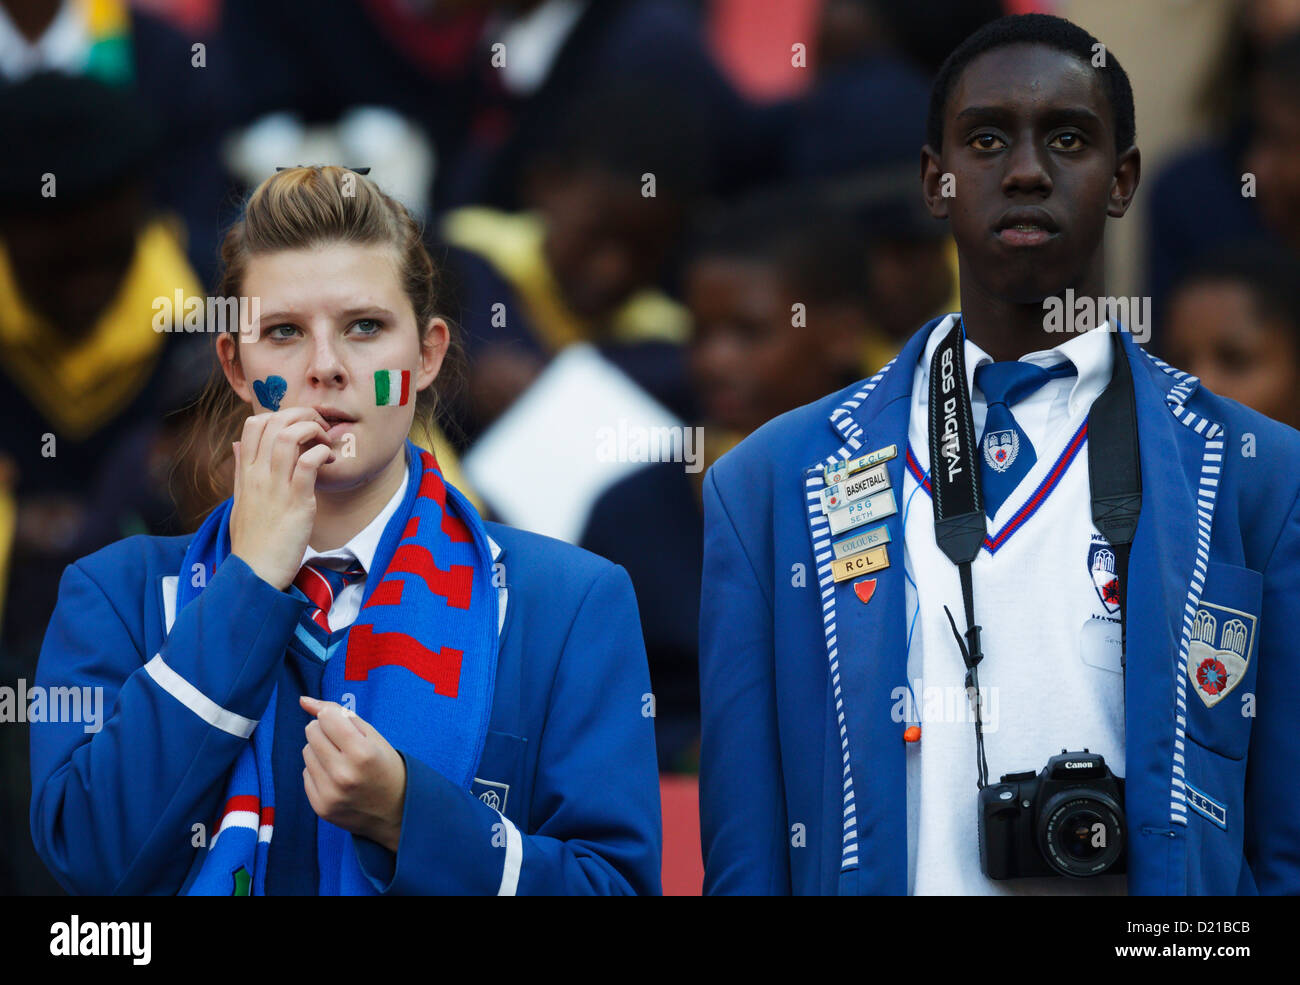 School uniformed spectators watch the action at the FIFA World Cup Group F match between Italy and Slovakia at Ellis Park. Stock Photo